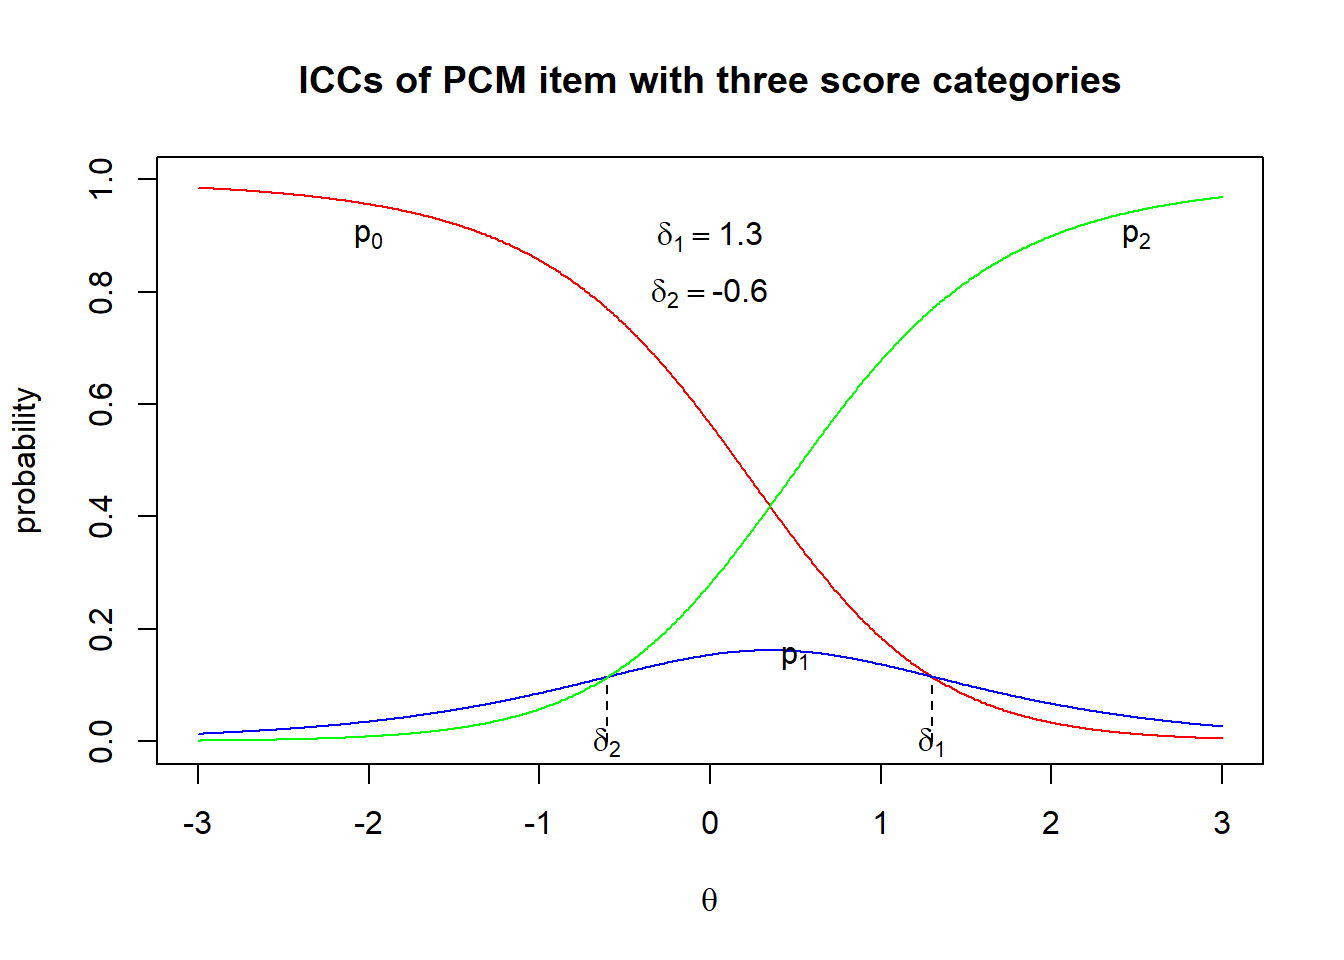 PCM ICCs with disordered deltas